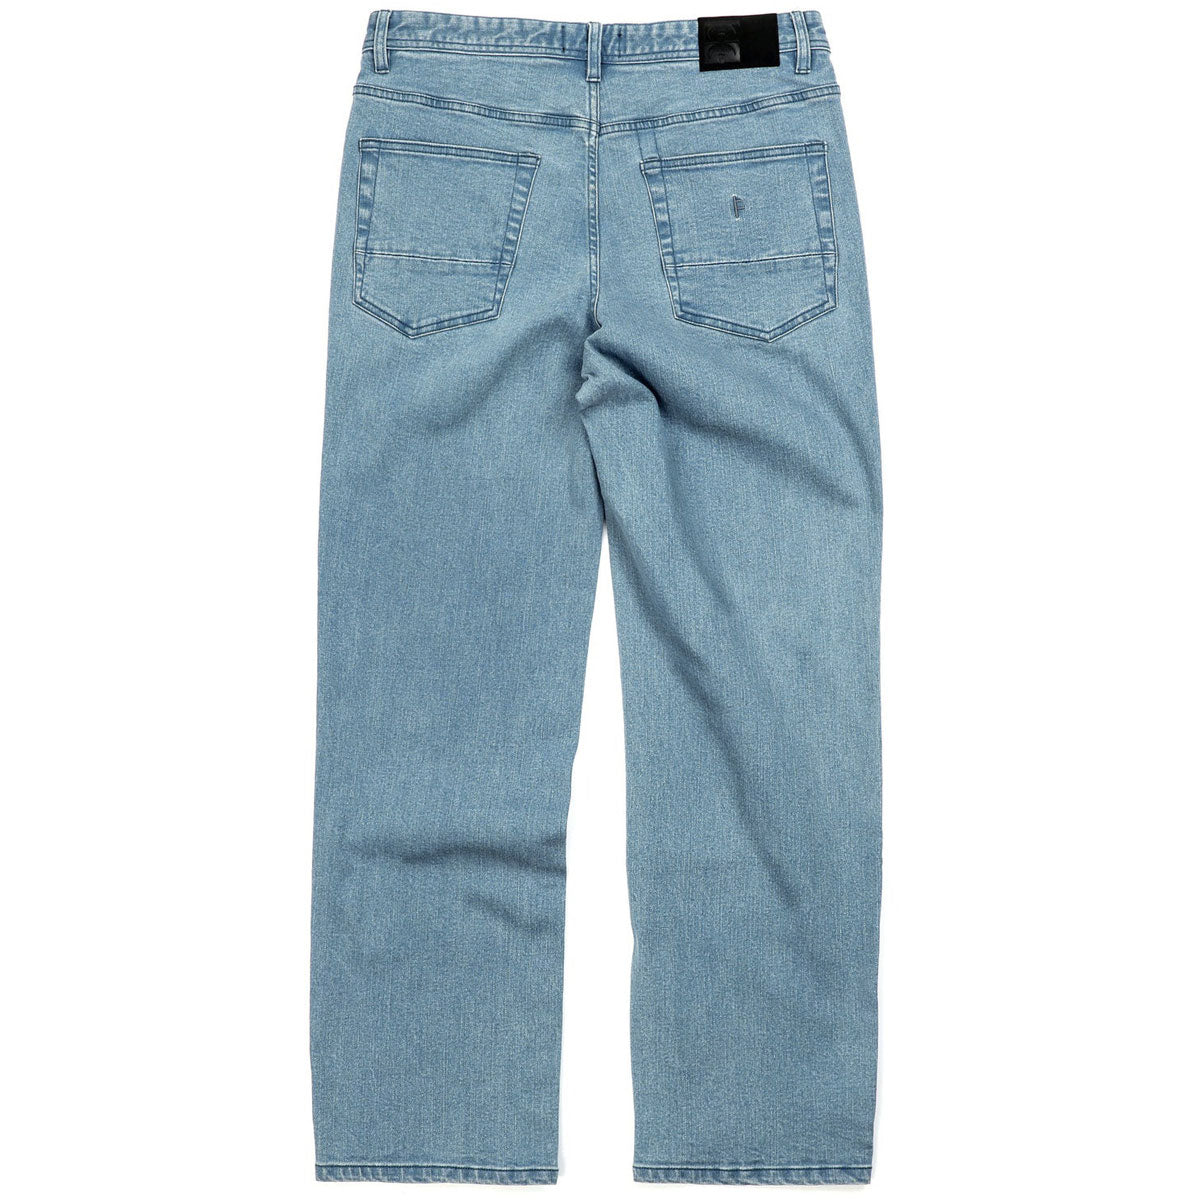 Former Crux Jeans - Blue Fade image 4